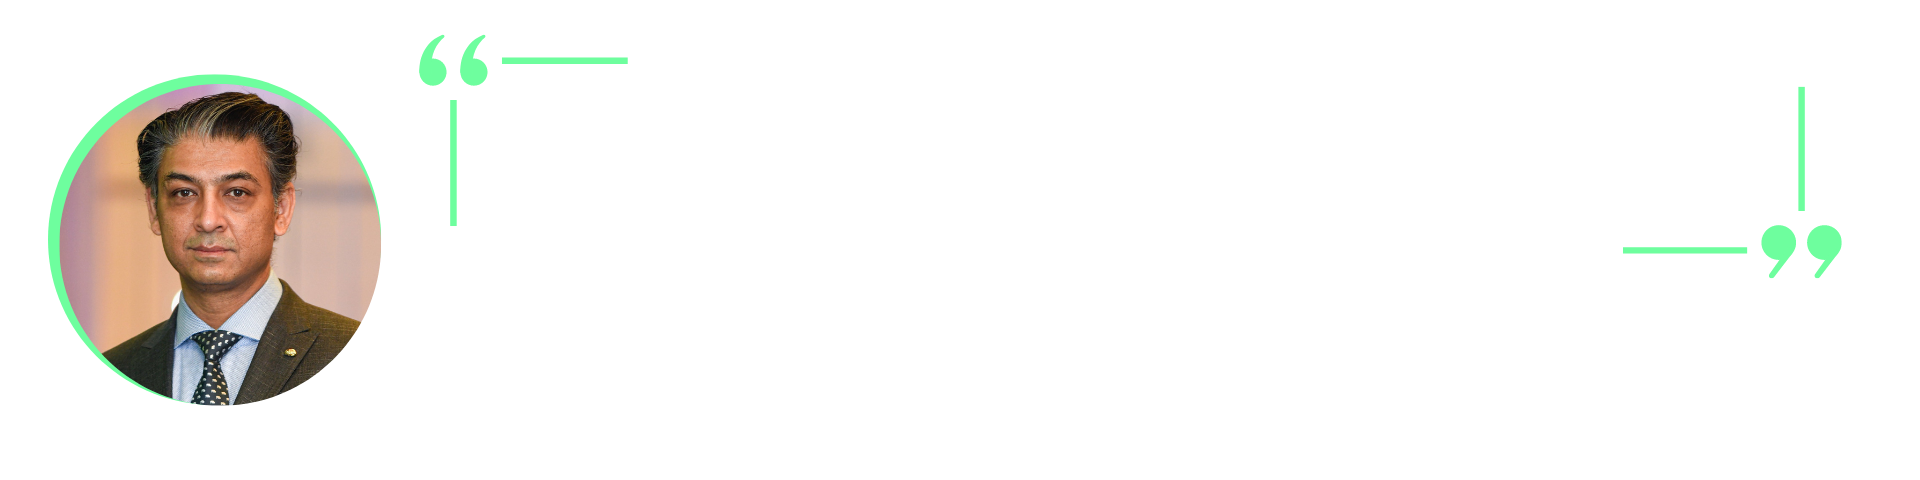 Doctor Adnan Siddiqui's quotation: "I would do some testing because based on the way the device is looking, if there's any forward pressure on it, this is going to occlude"